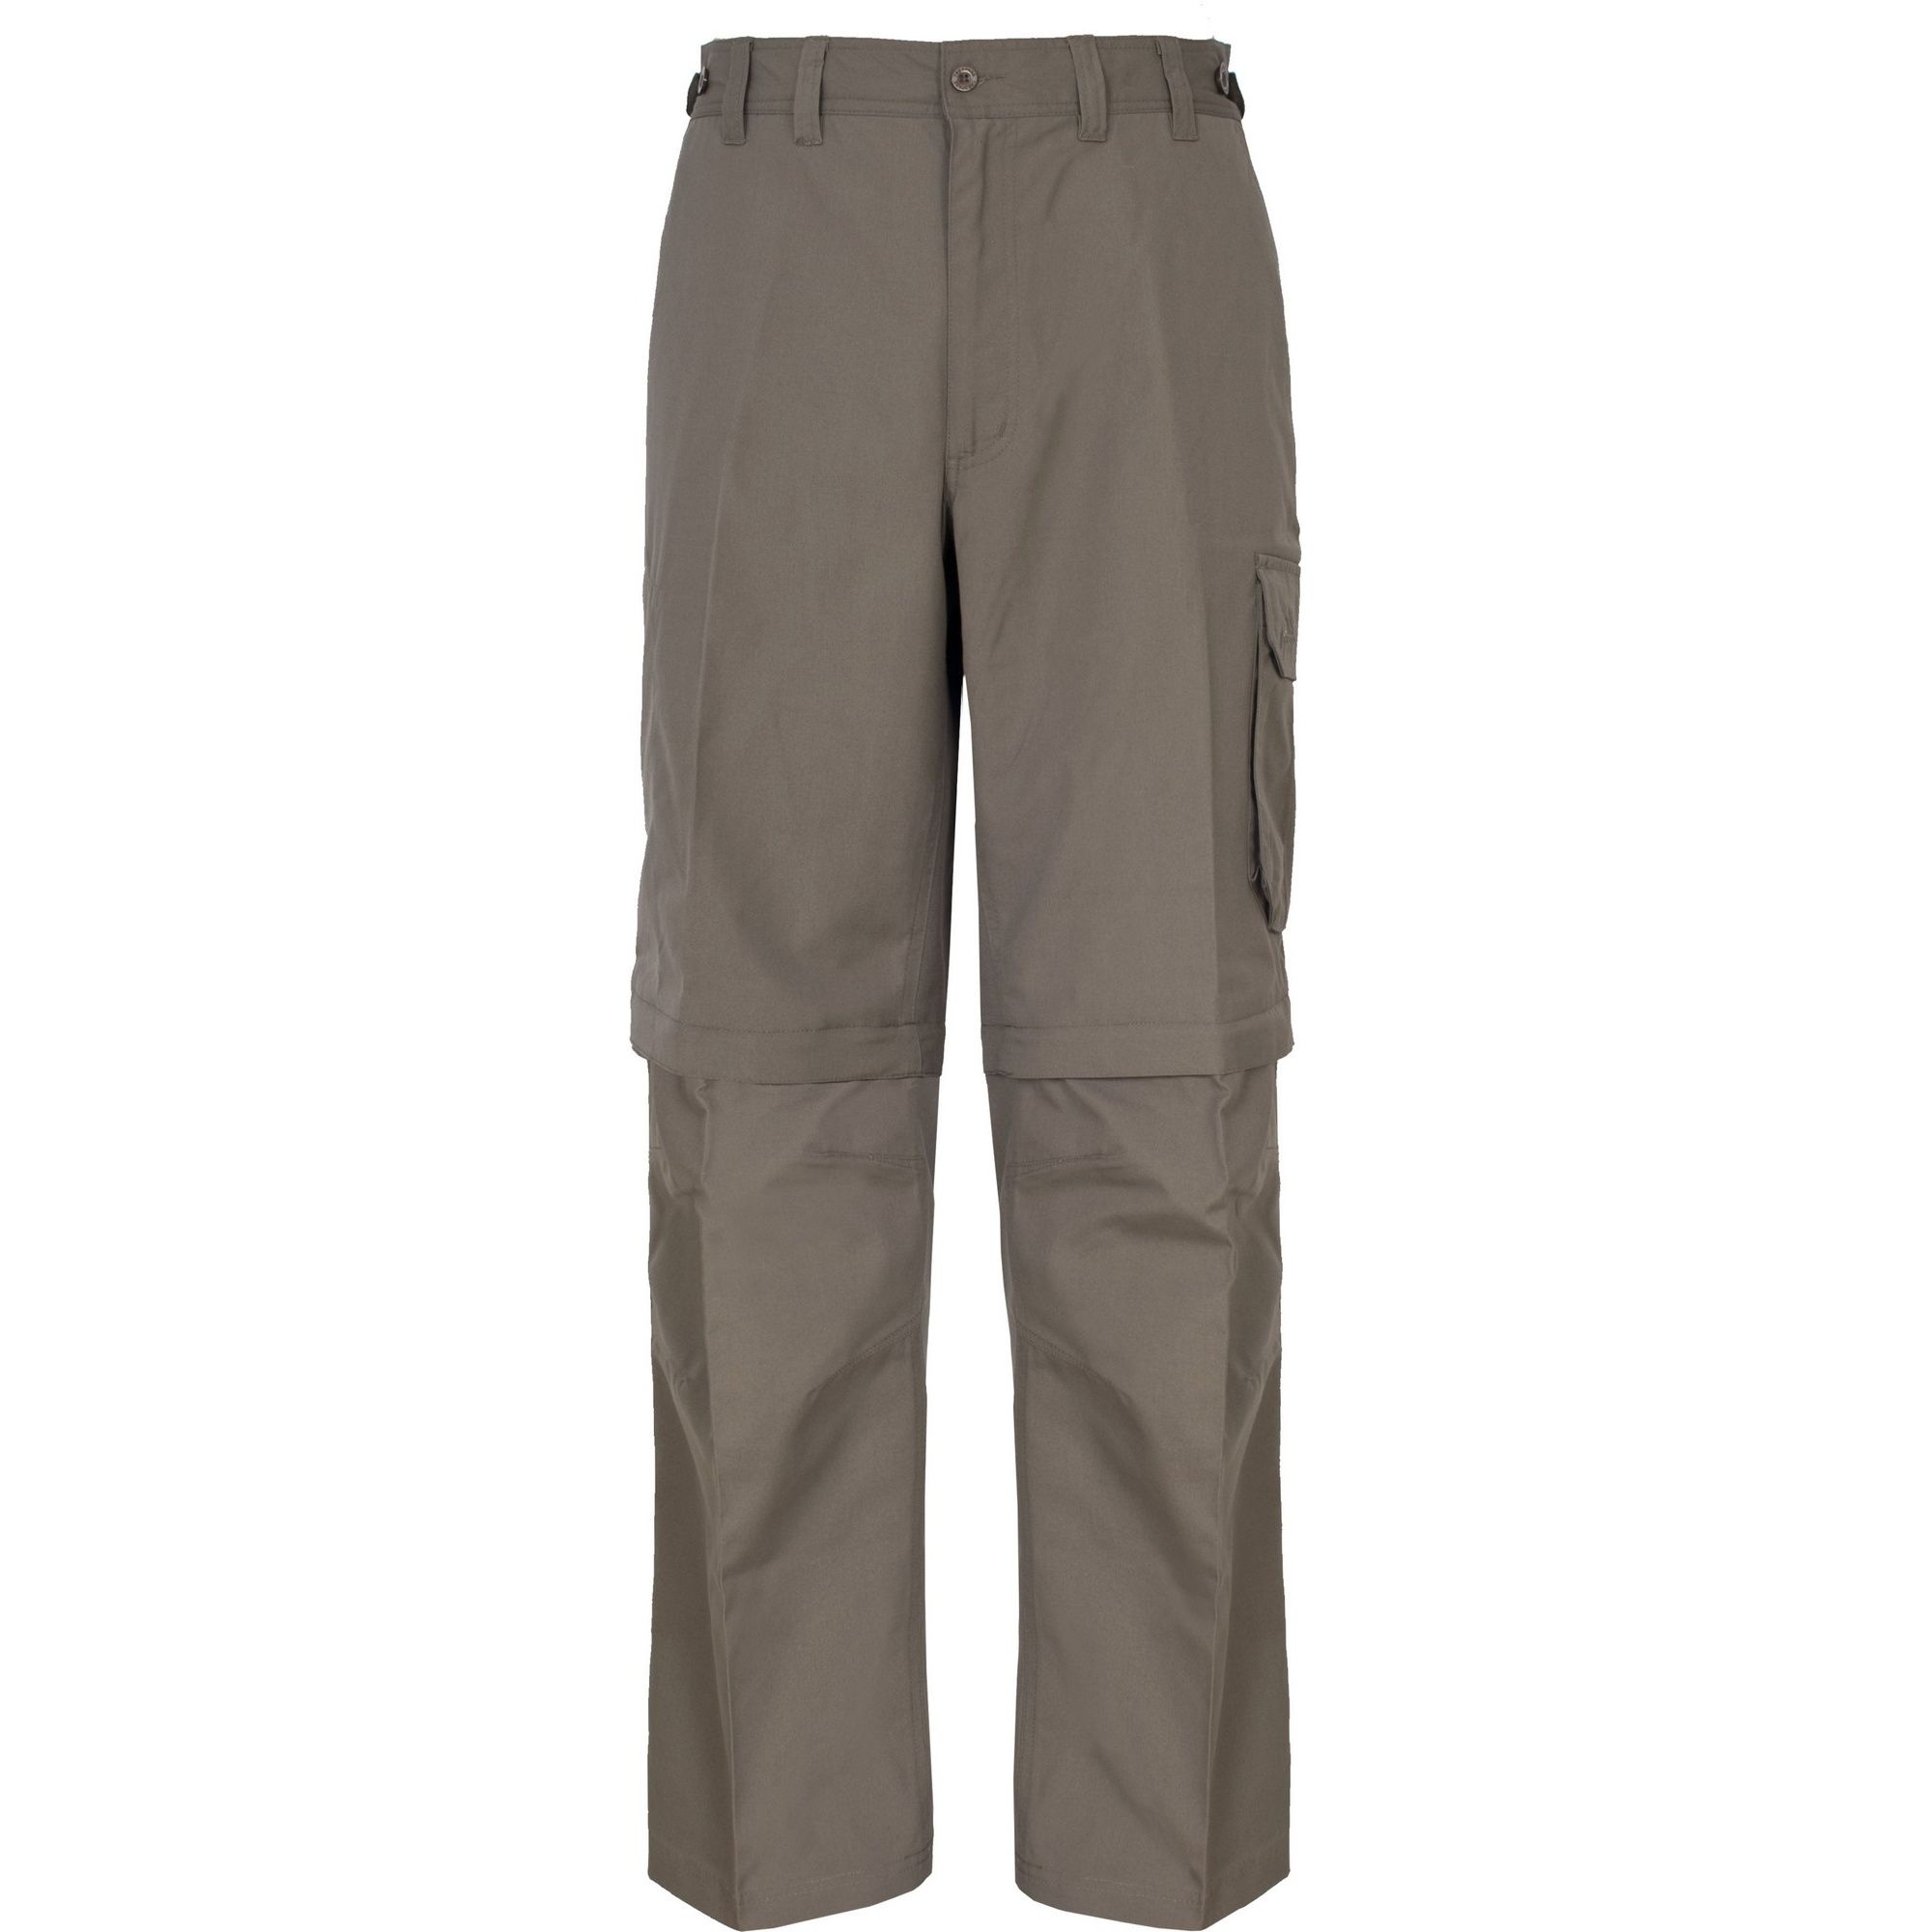 Mens convertible cargo trousers. Durable water repellent finish. UPF40+ protective fabric. Converts into shorts with zip off legs from the knee, making them ideal for outdoor walking. Moisture wicking build. Quick dry fabric. 2 zipped pockets, 1 concealed zipped pocket, 2 side pockets and 3 bellow patch pockets. Elasticated back panel with side adjusters. Articulated knee darts for added mobility. 65% Polyester, 35% Cotton.